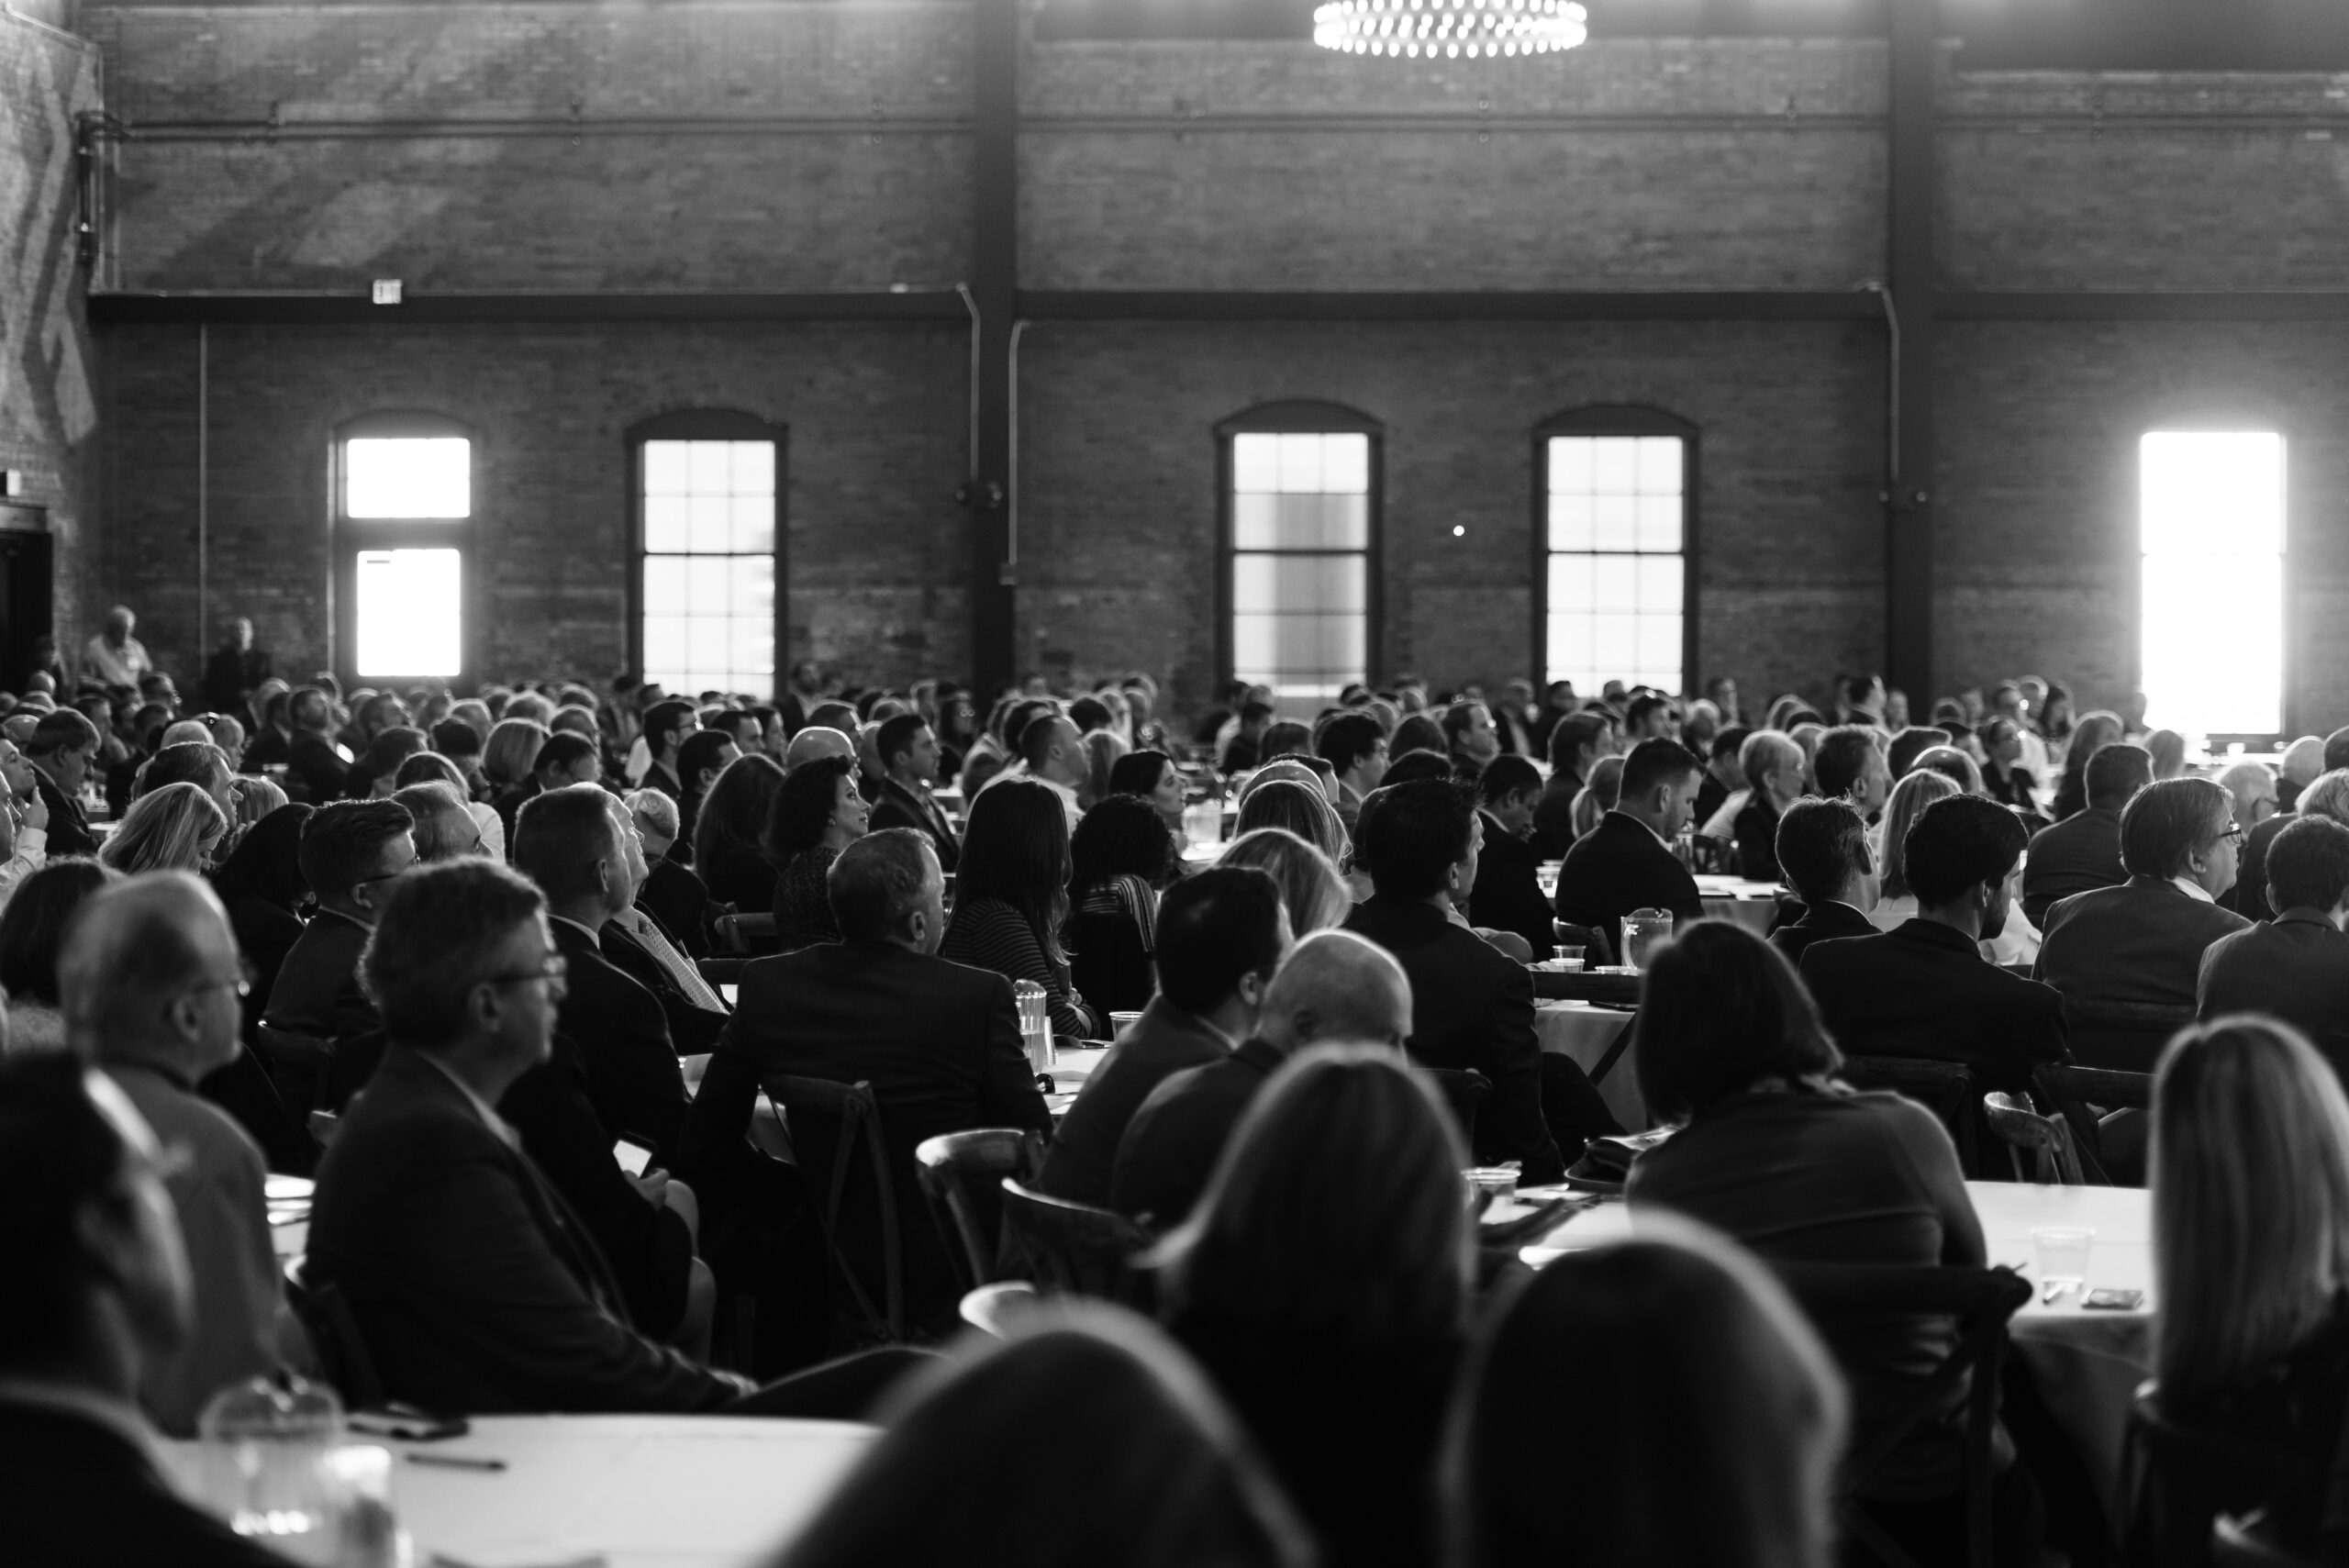 Black and White image of a crowd of people in Tampa Florida Armature Works ballroom during a business event